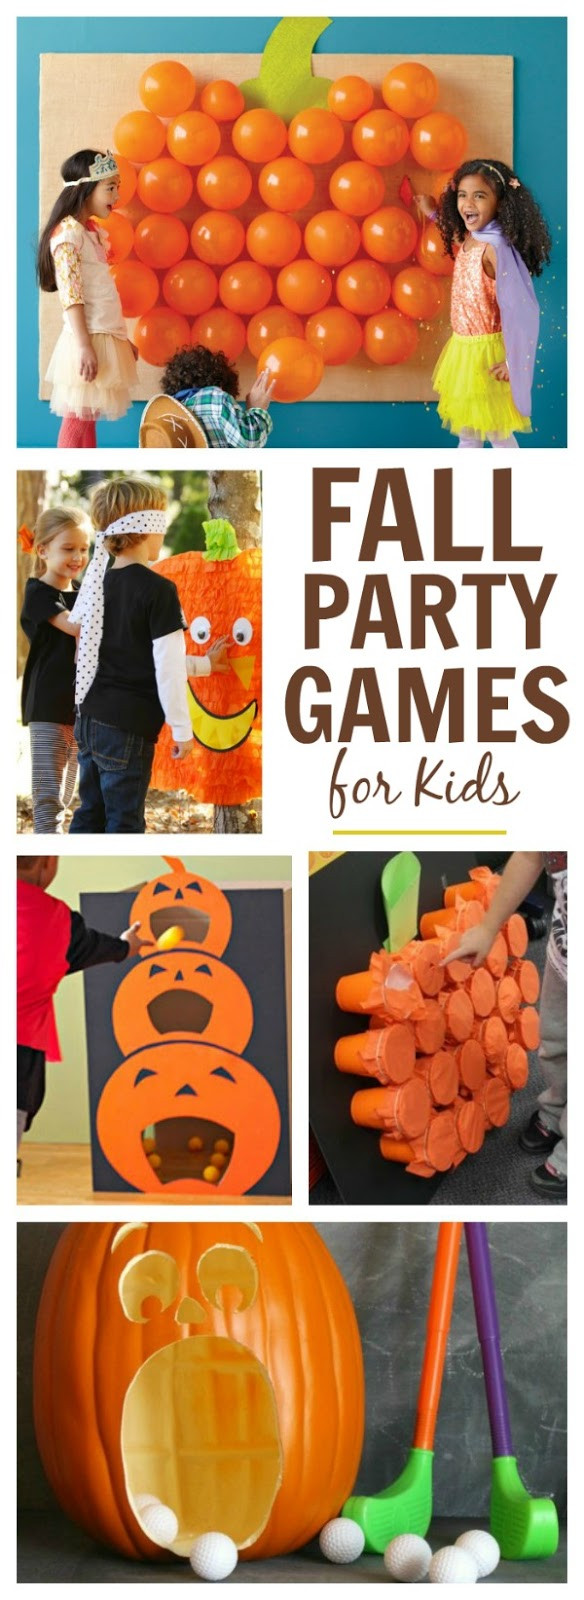 Fall Party Ideas For Kids
 Pumpkin Activities & Crafts for Kids